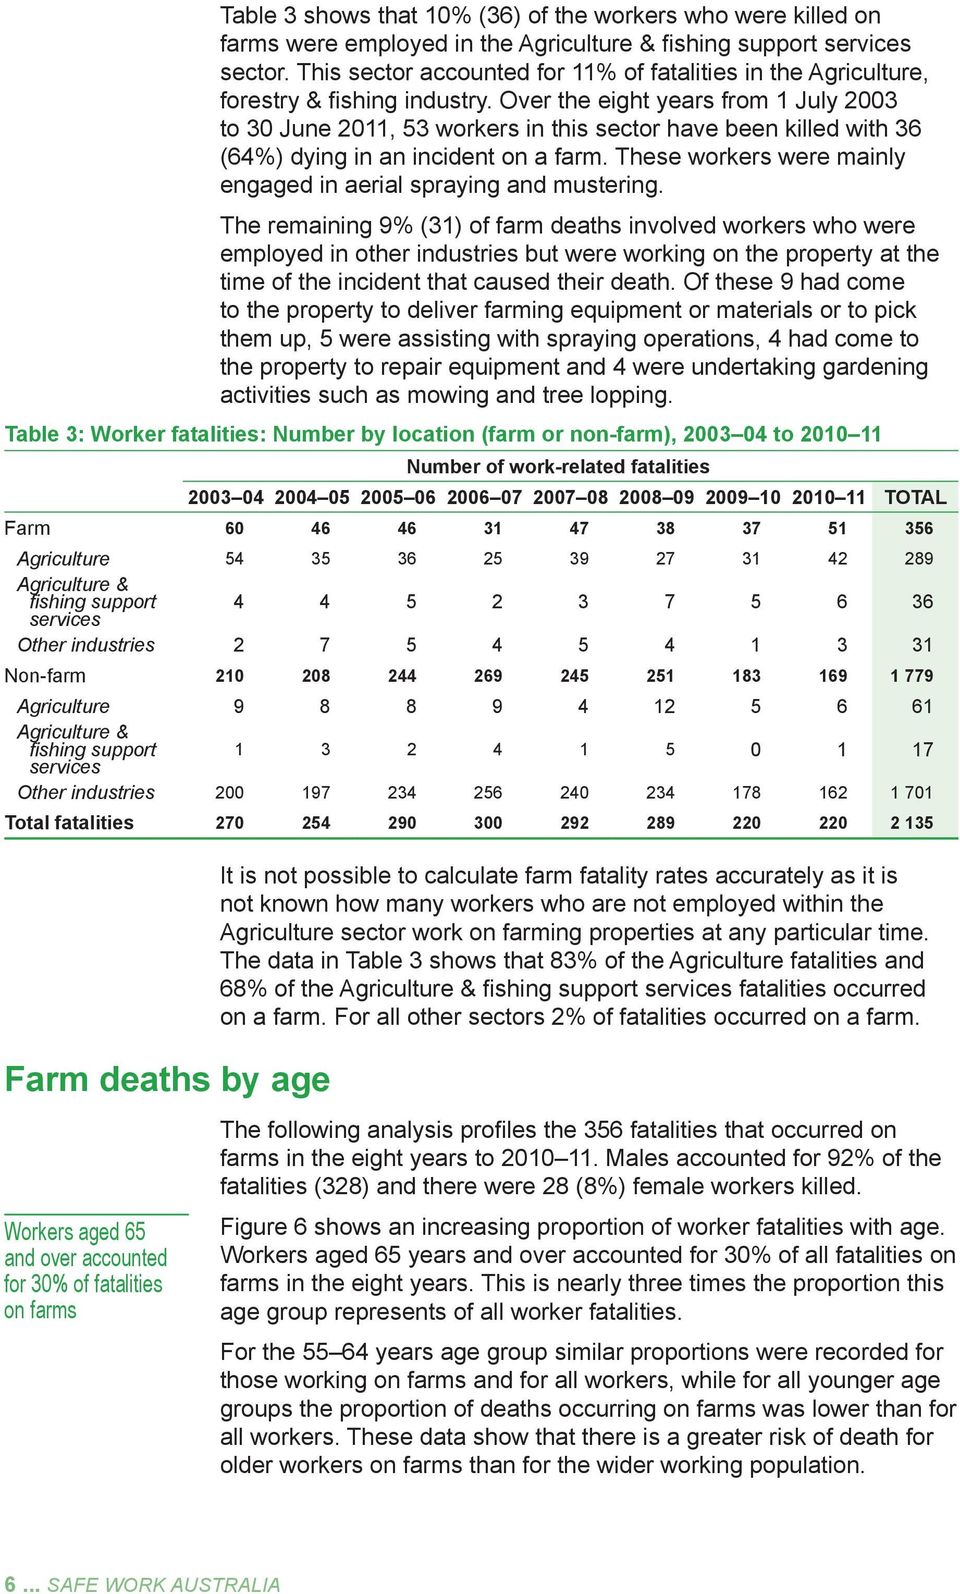 Over the eight years from 1 July 2003 to 30 June 2011, 53 workers in this sector have been killed with 36 (64%) dying in an incident on a farm.